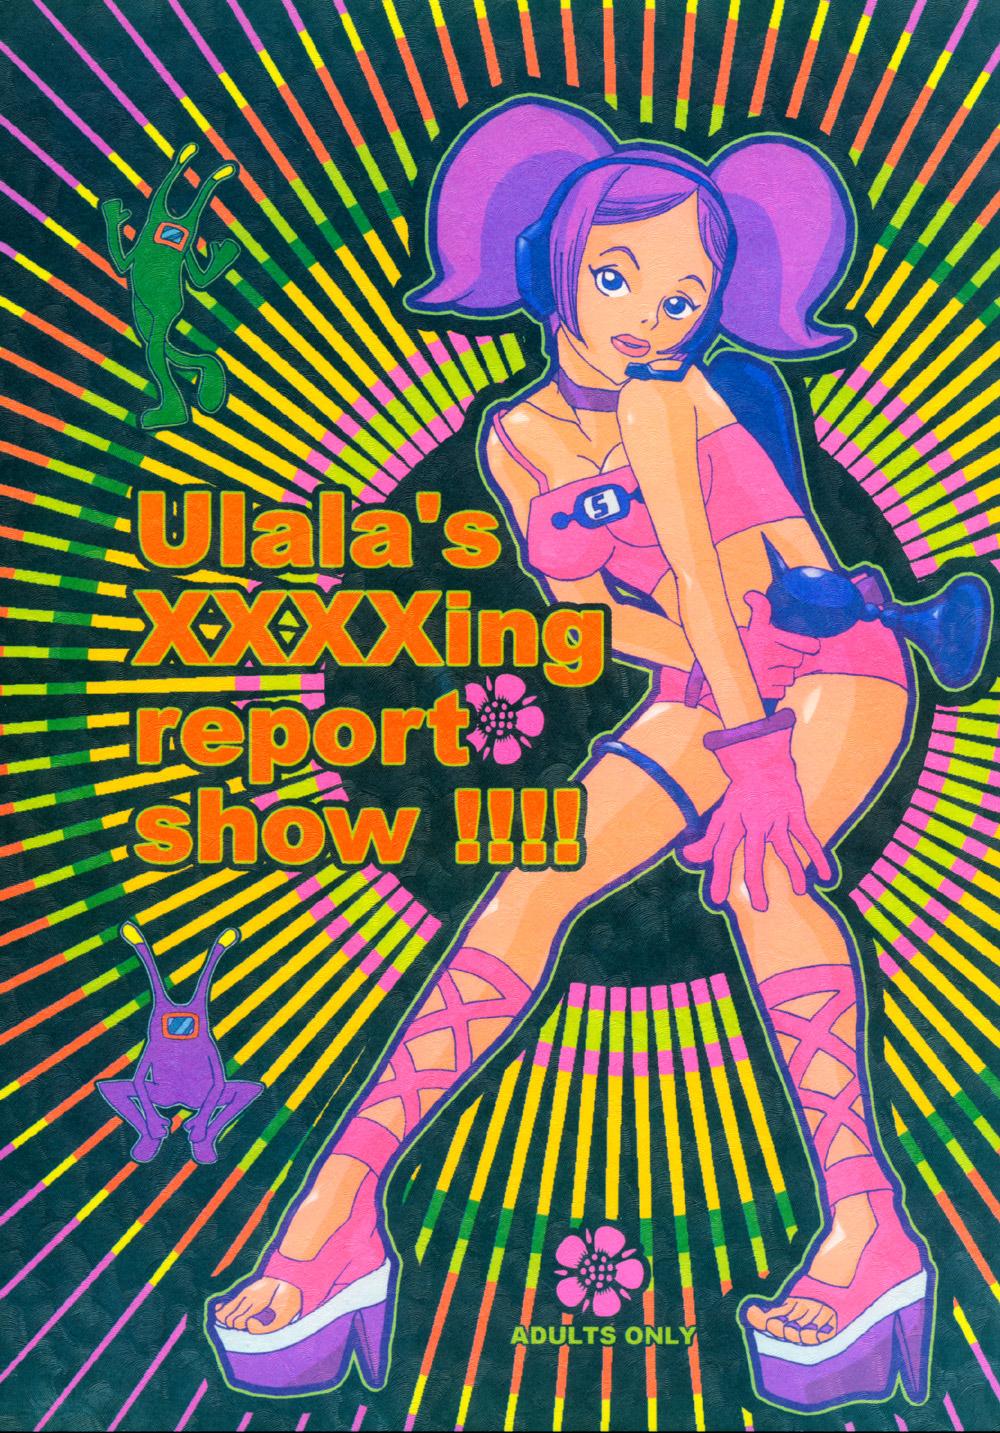 Latinos Ulala's XXXXing Report Show!!!! - Space channel 5 Hardcore Free Porn - Page 1